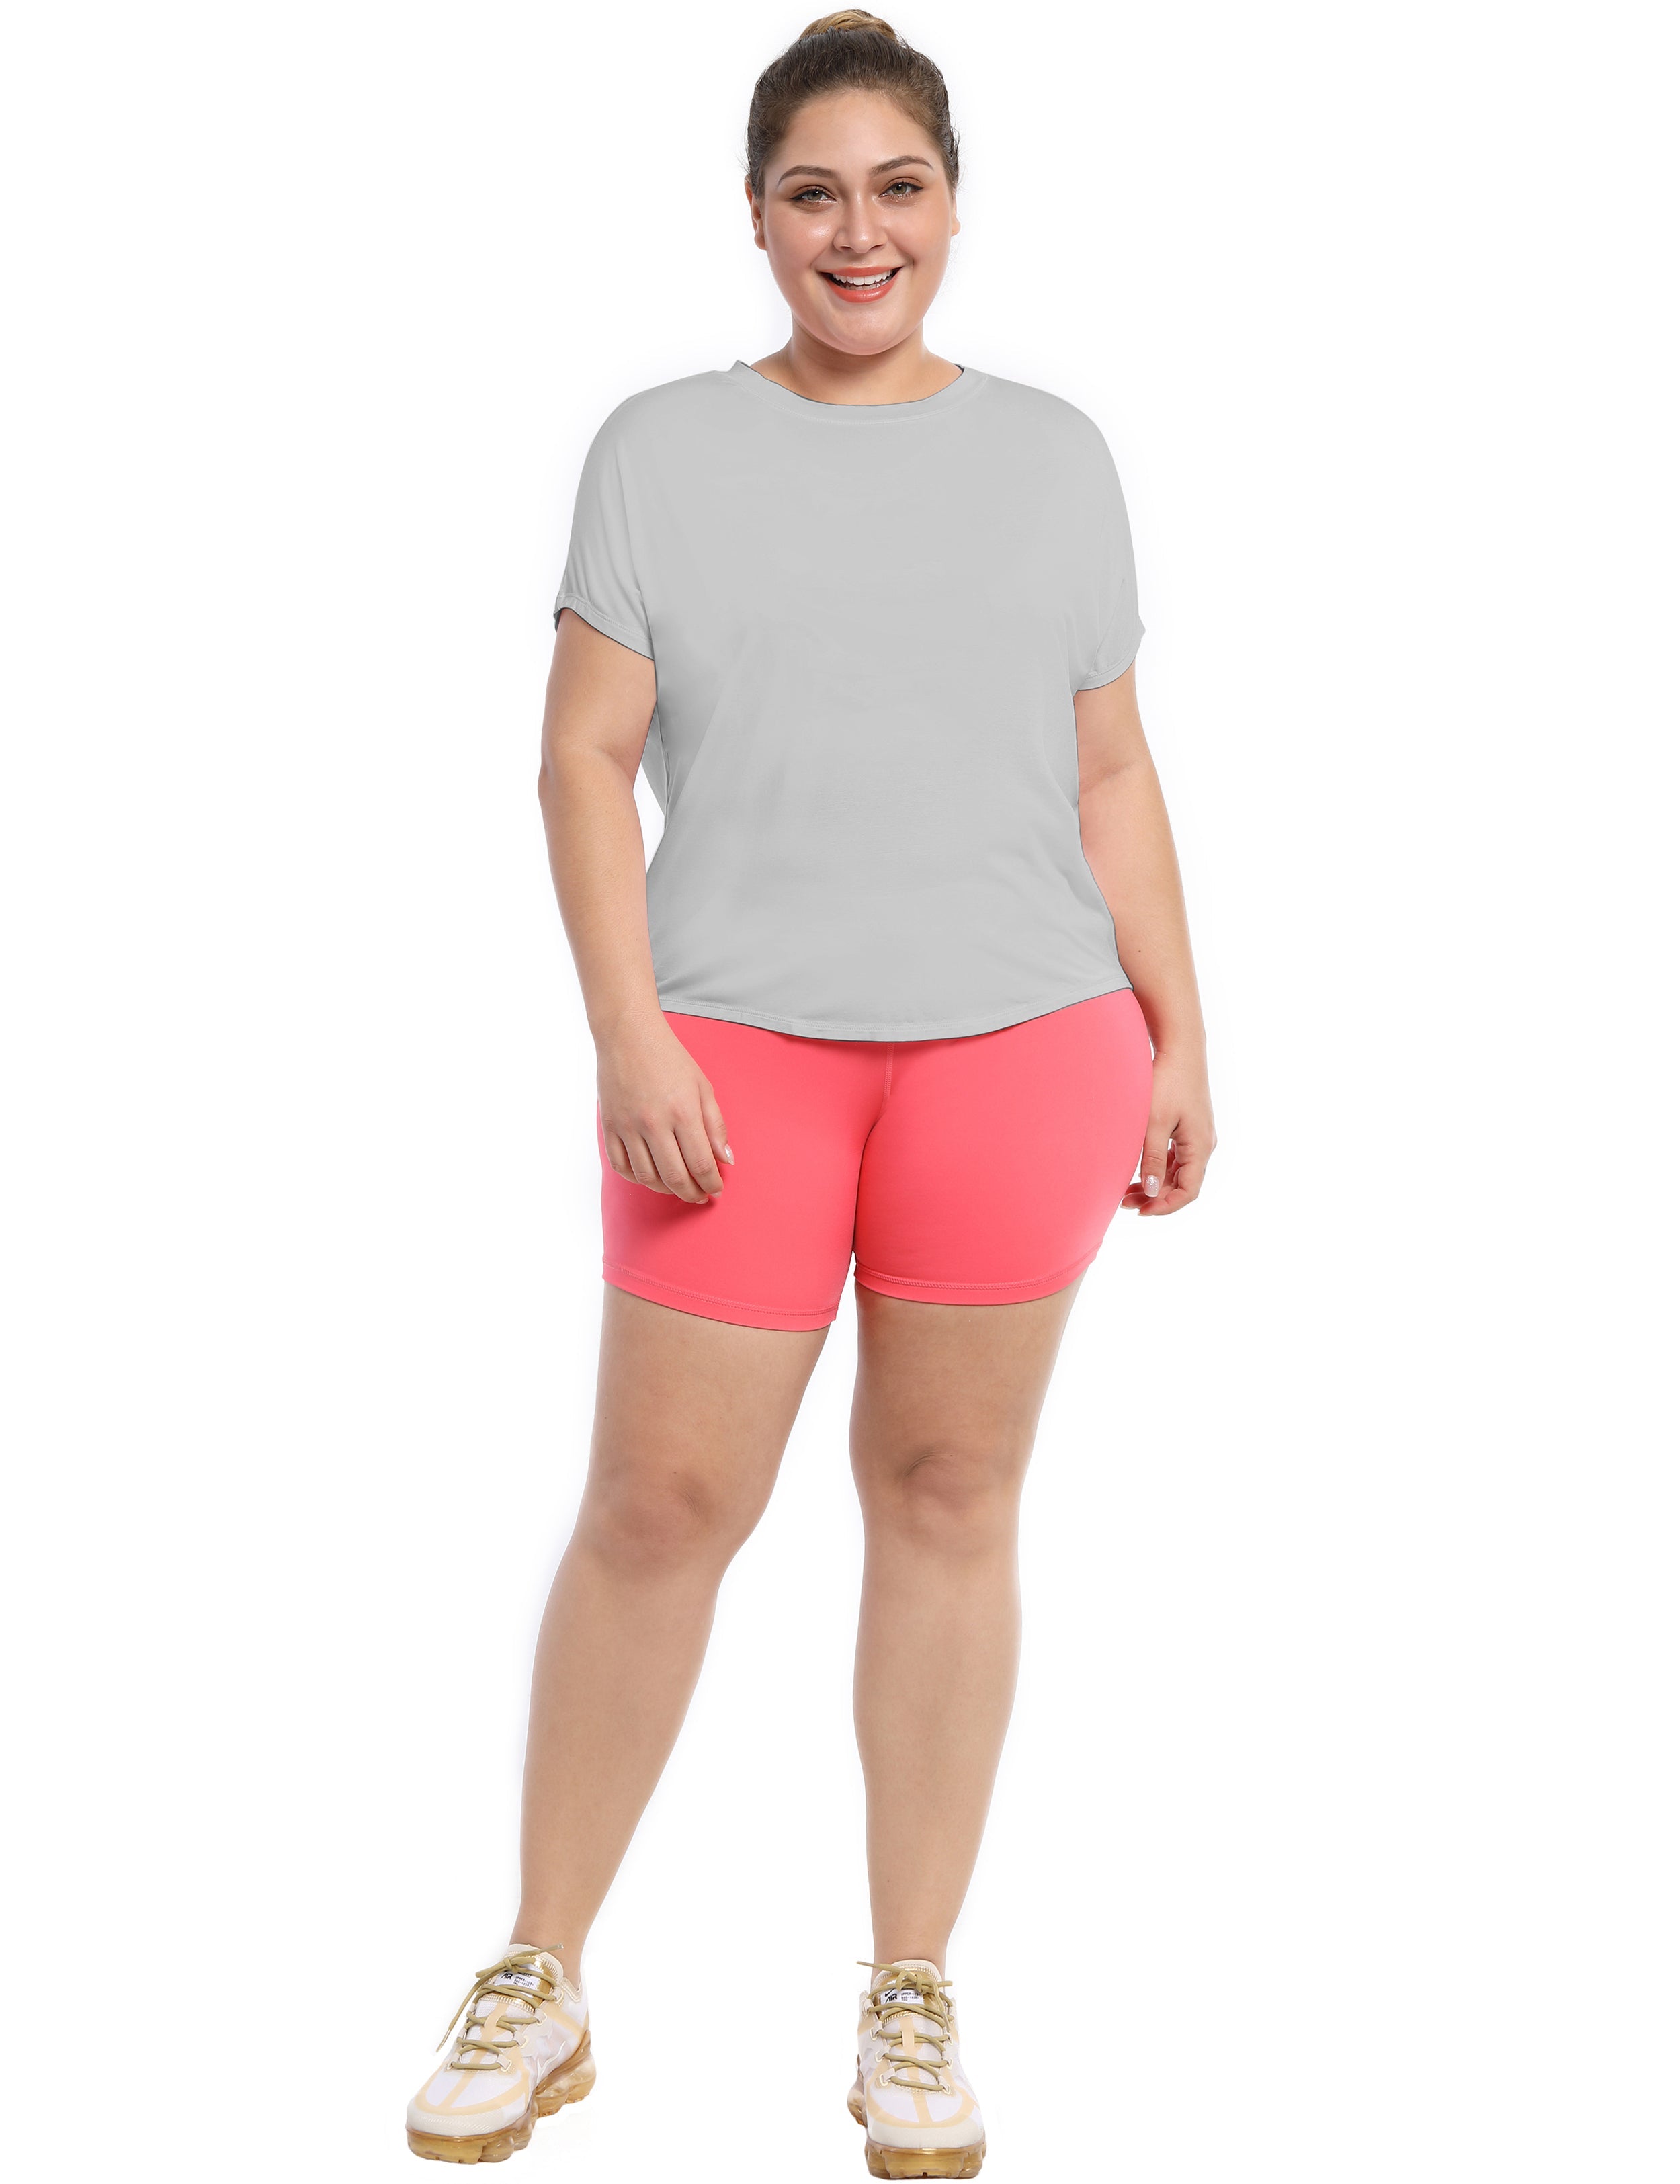 Hip Length Short Sleeve Shirt lightgray 93%Modal/7%Spandex Designed for Running Classic Fit, Hip Length An easy fit that floats away from your body Sits below the waistband for moderate, everyday coverage Lightweight, elastic, strong fabric for moisture absorption and perspiration, sports and fitness clothing.